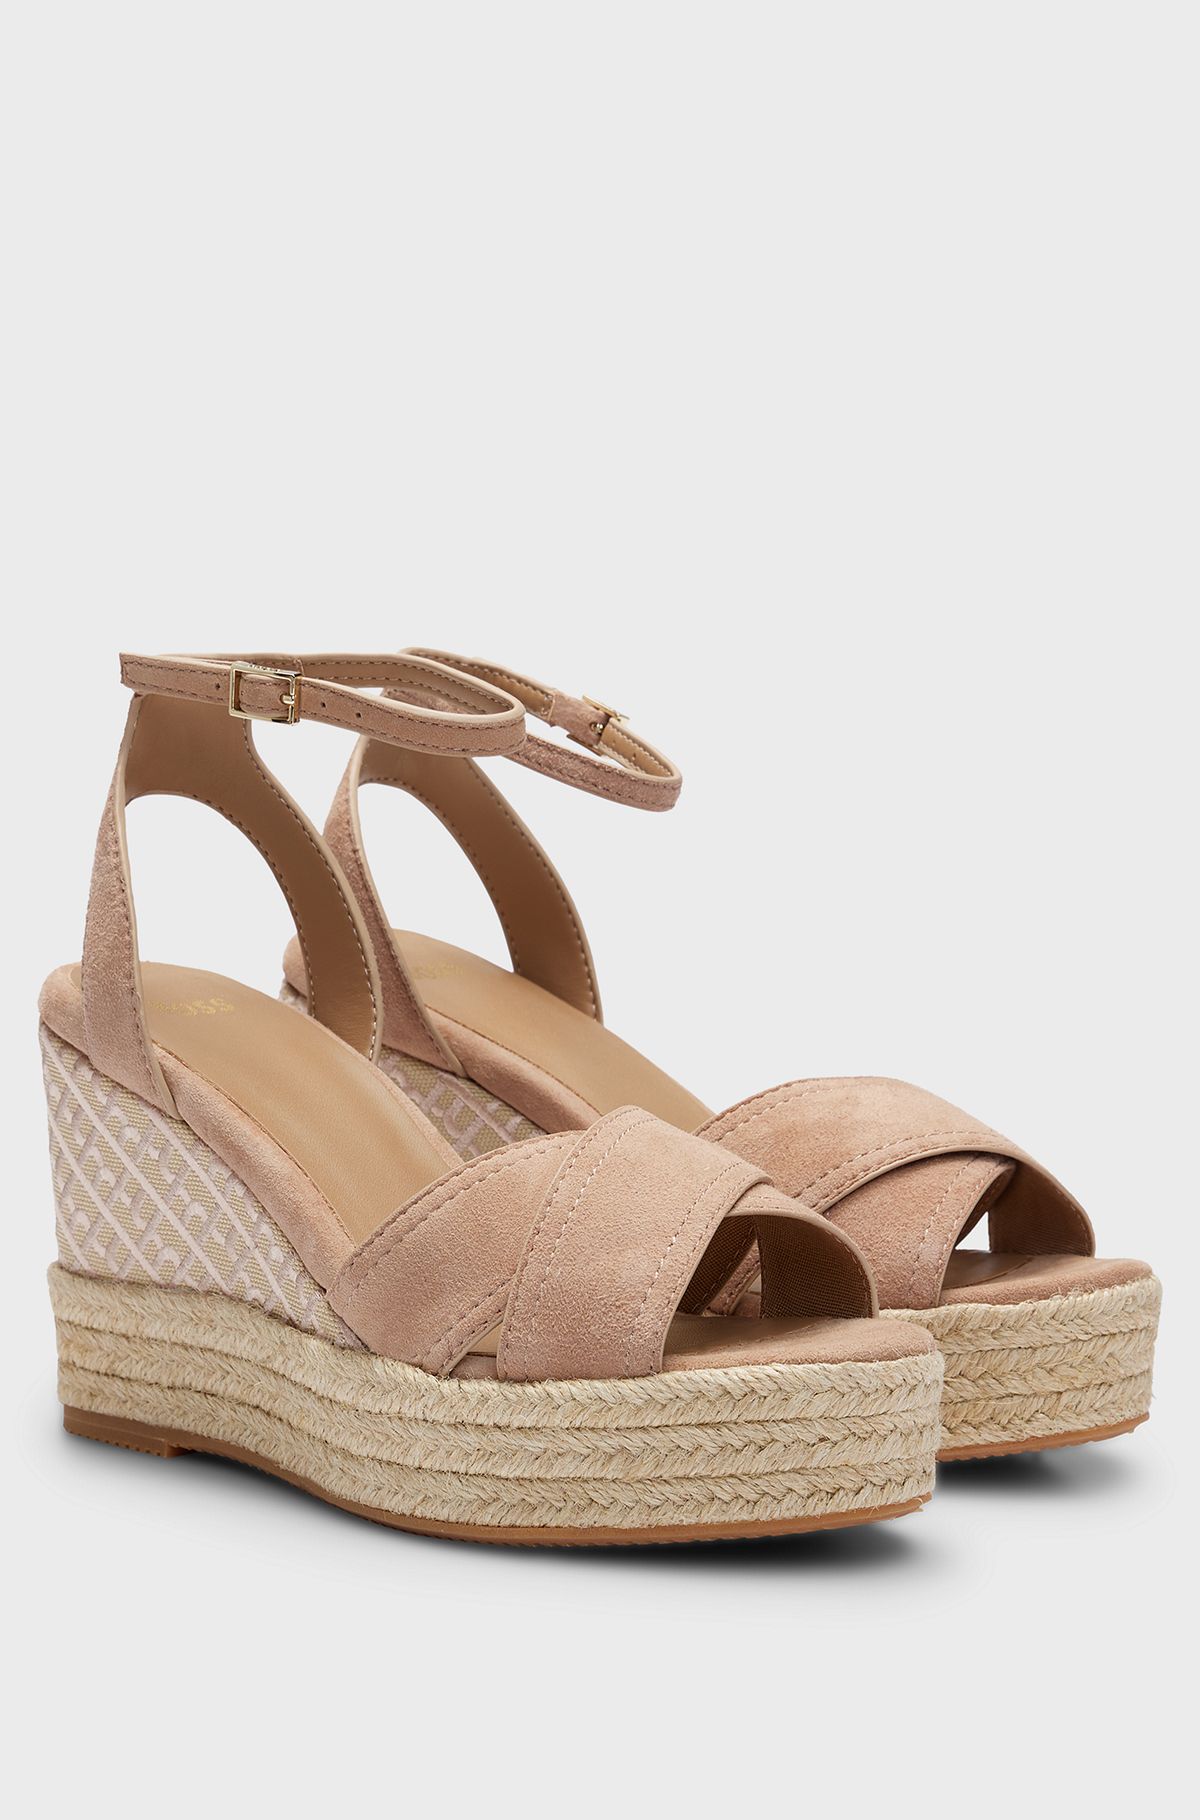 Suede sandals with monogram-patterned wedge and ankle strap, Light Brown